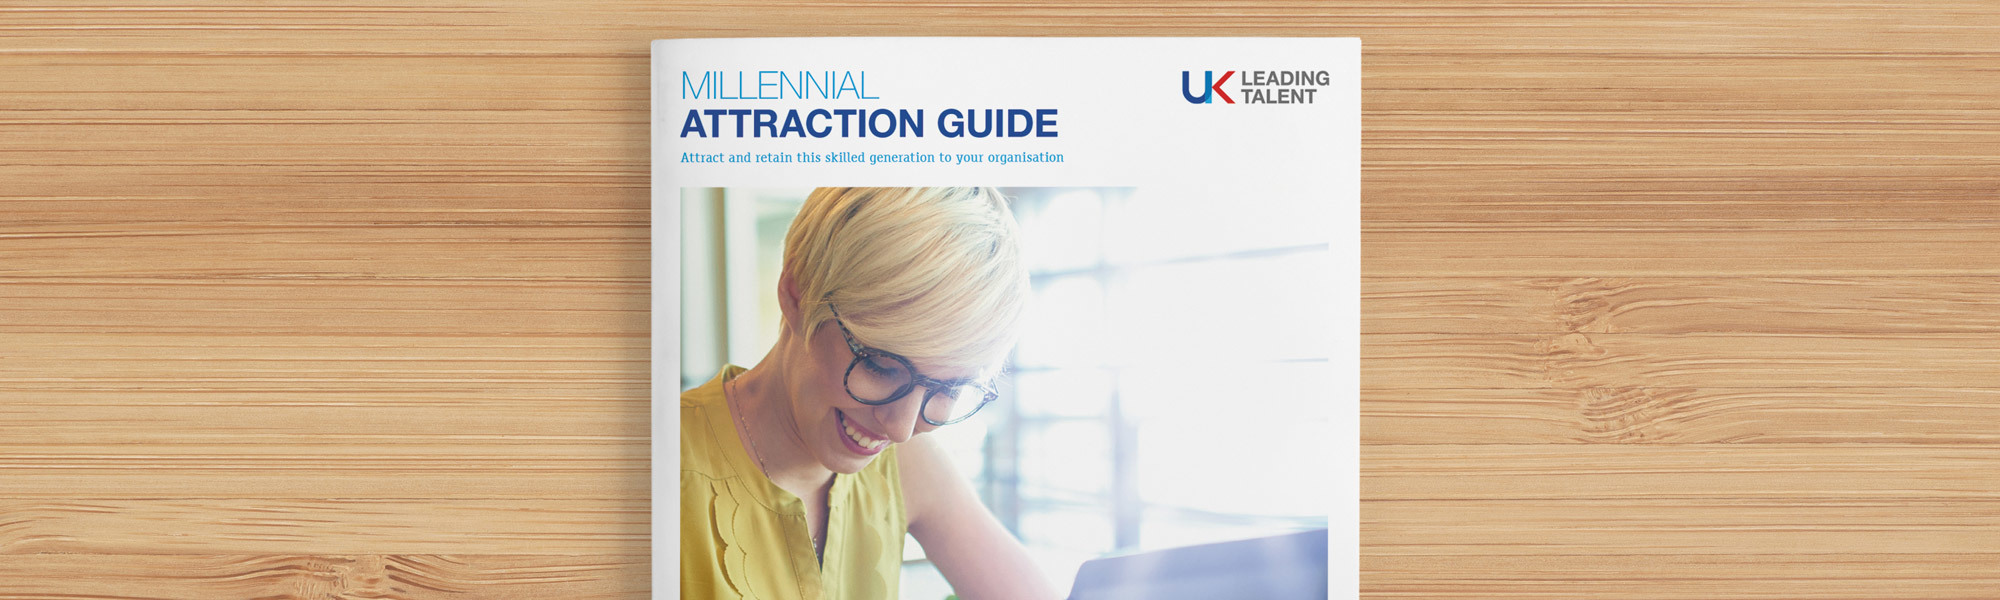 Millennial Attraction Guide